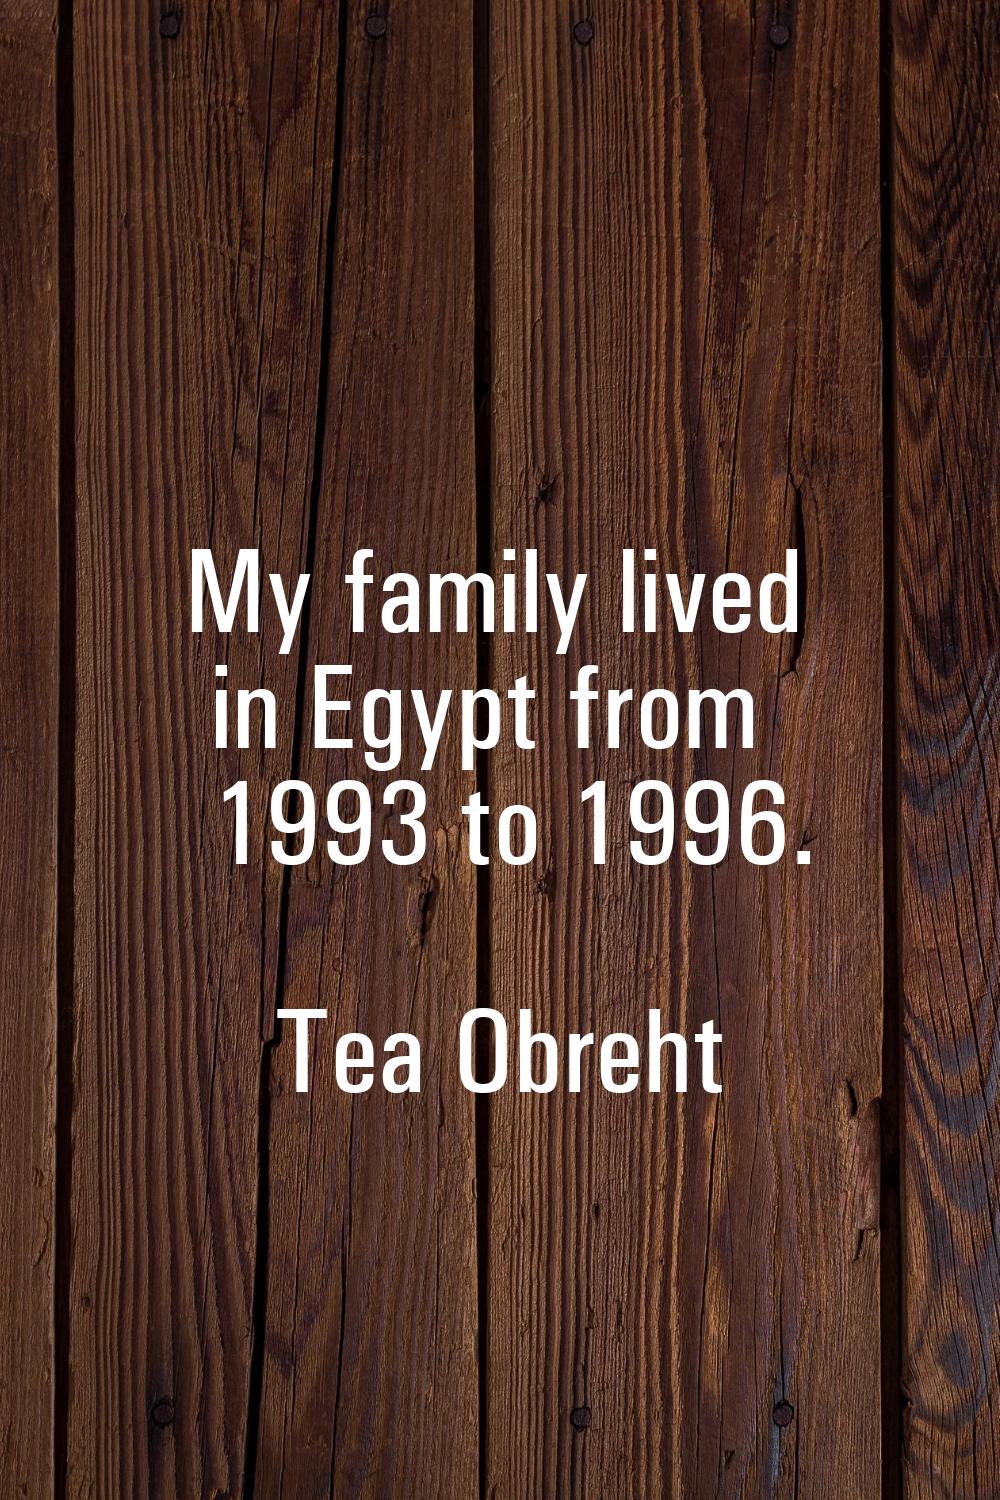 My family lived in Egypt from 1993 to 1996.